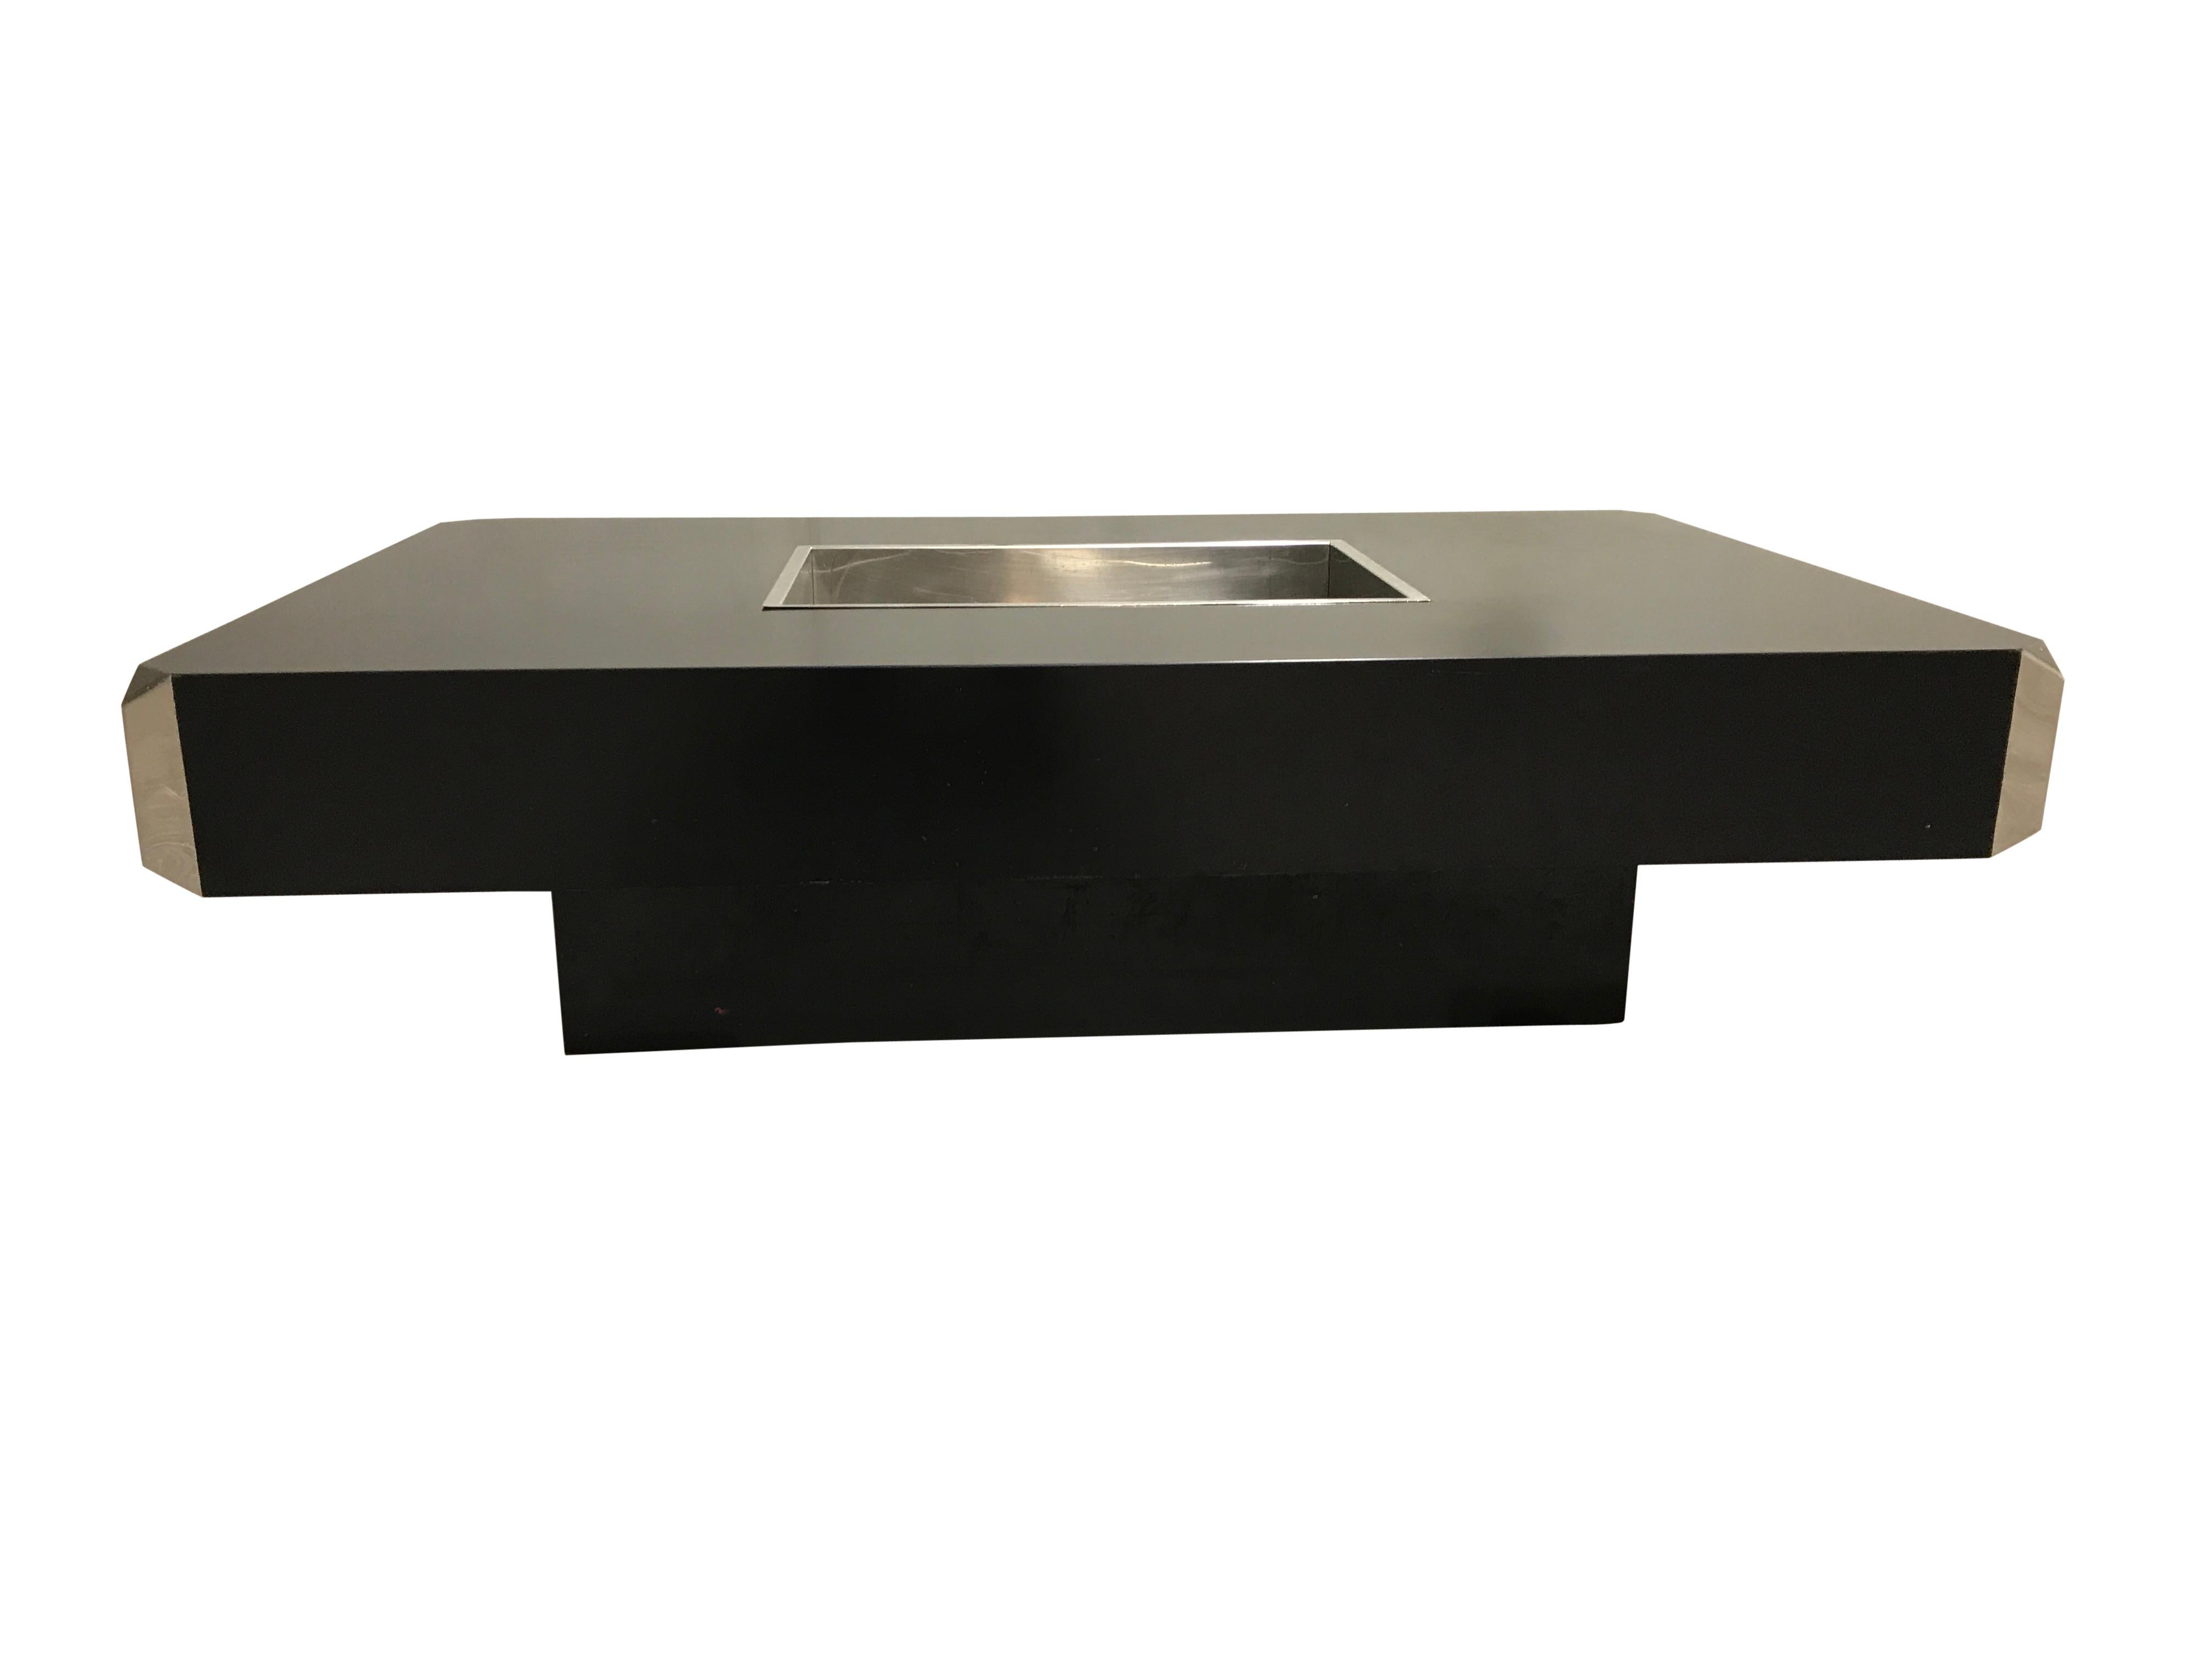 Late 20th Century Black Alveo coffee table by Willy Rizzo, 1970s